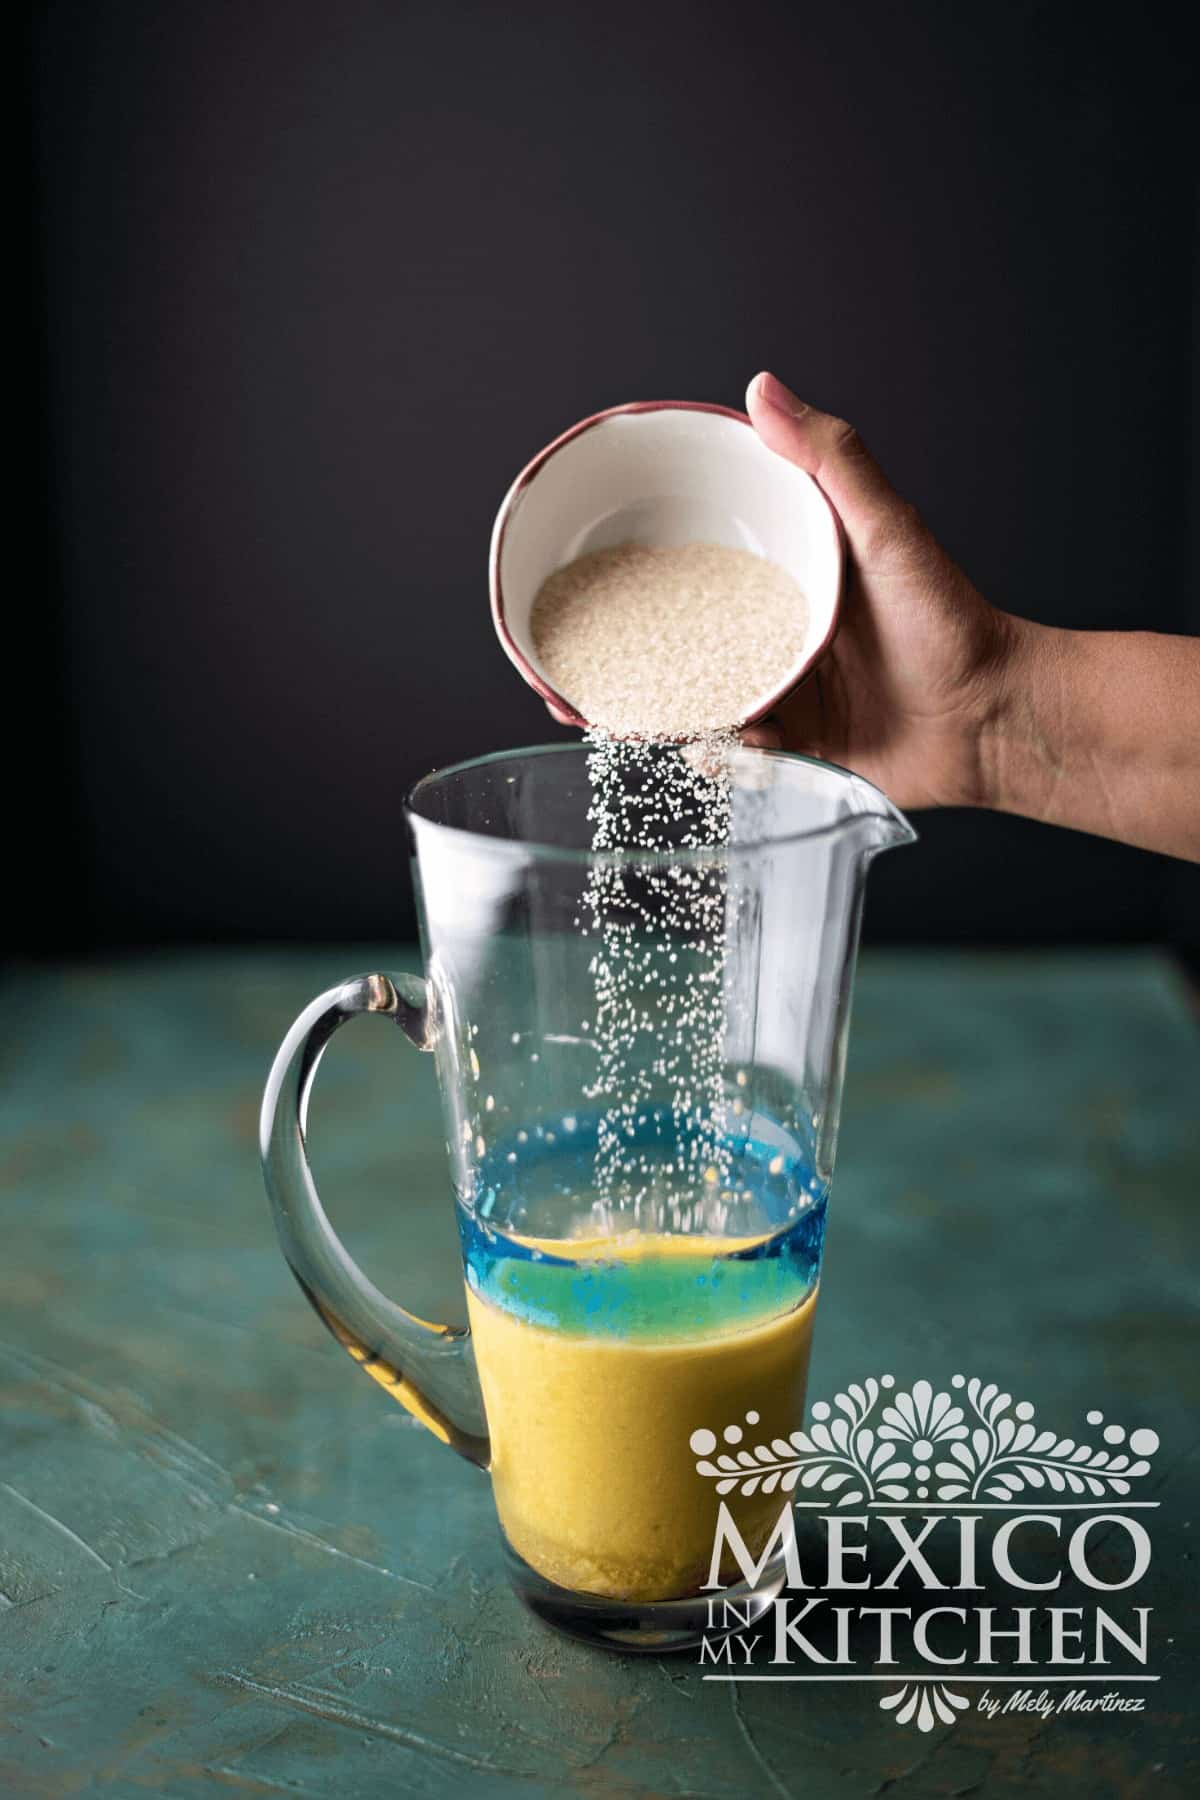 Sugar is added to a glass pitcher of fruit puree.